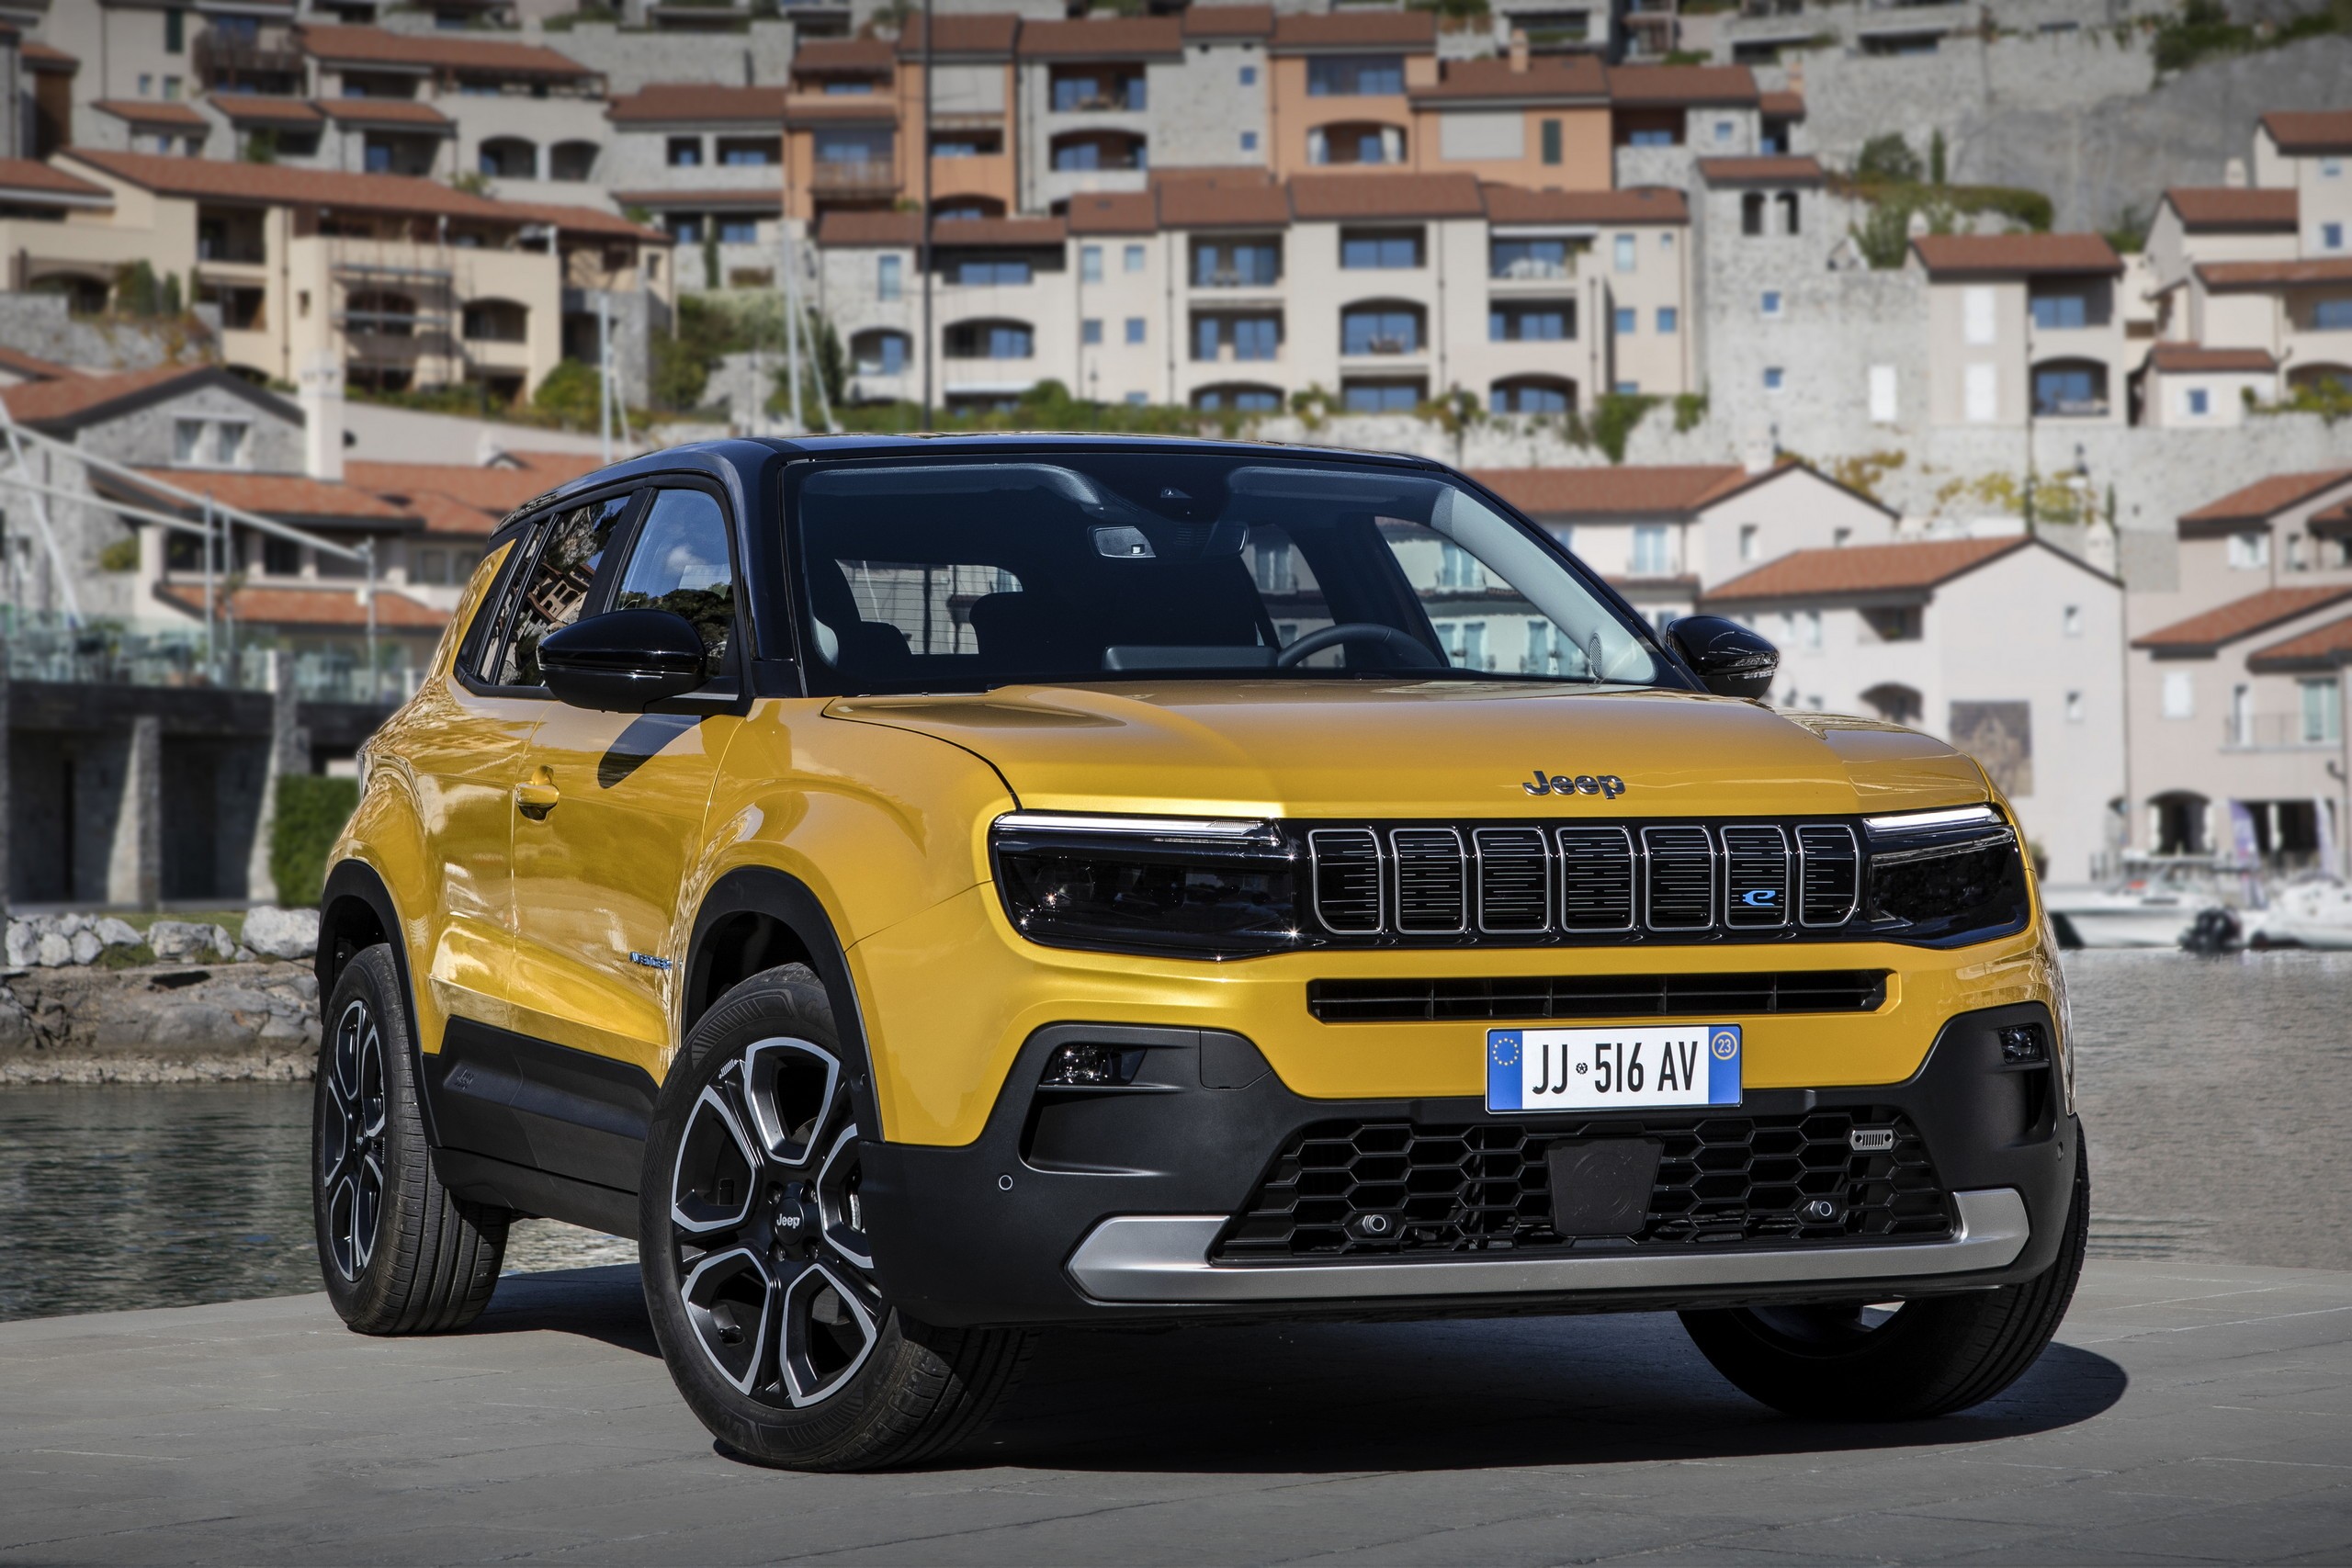 Pre-orders for the new Jeep Avenger are OPEN, priced from £36,500